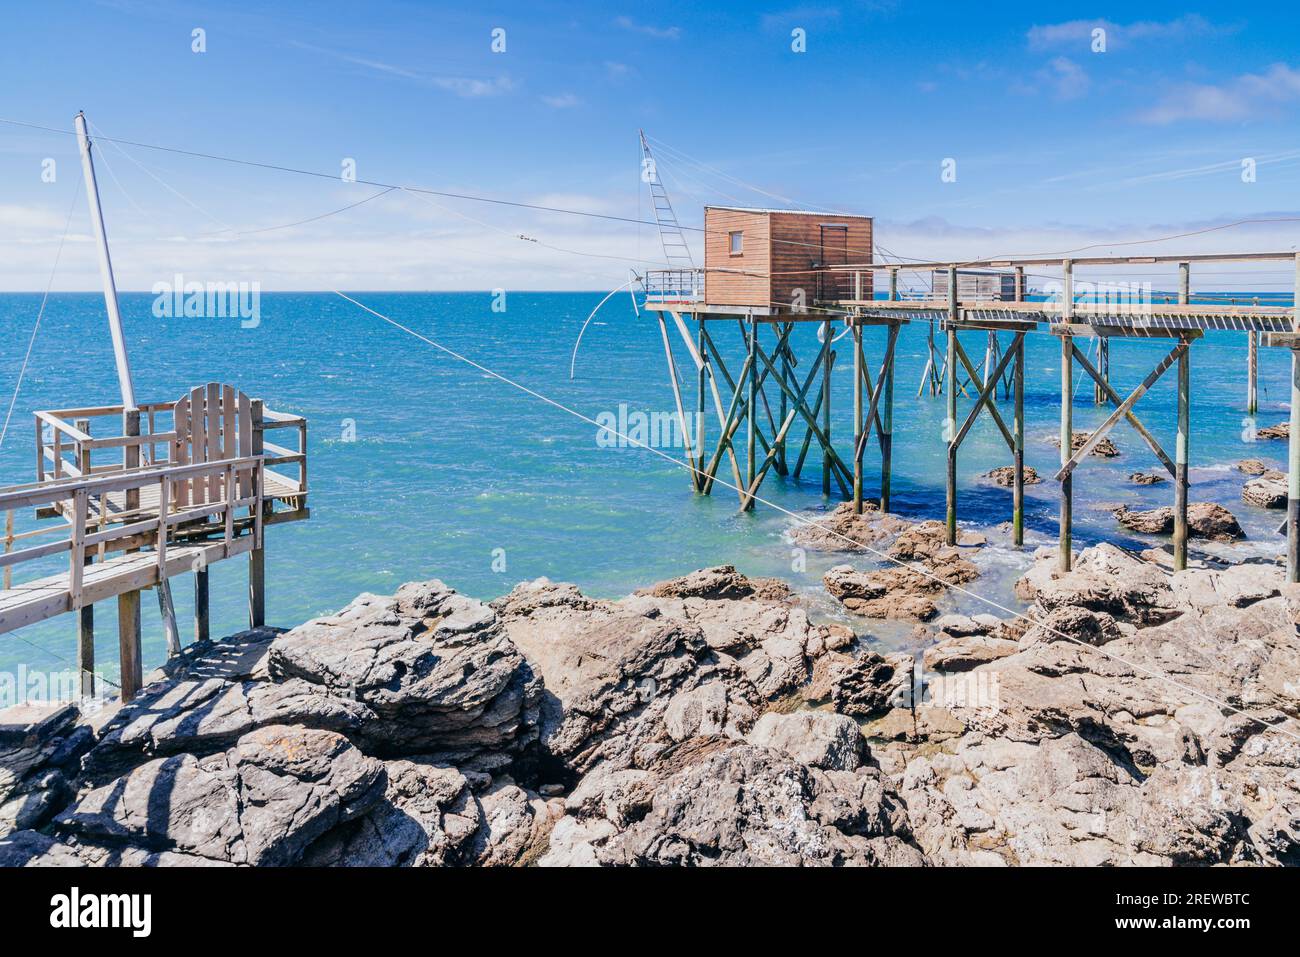 Traditional fishery huts made of wood by the Jade Coast in Pornic, France Stock Photo